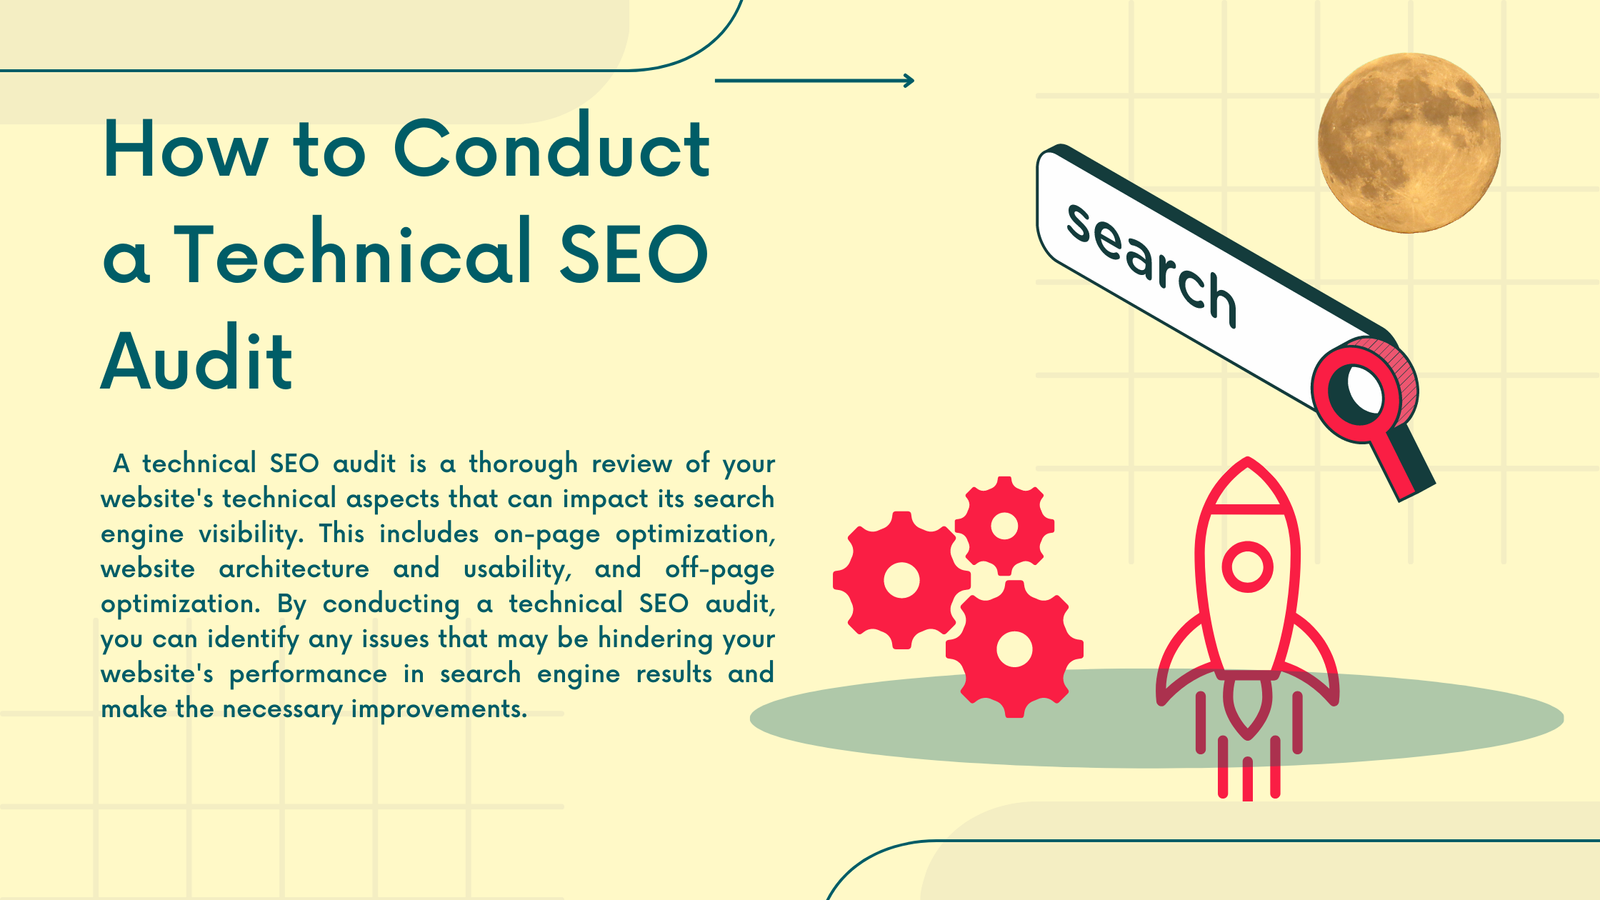 How to conduct a technical SEO audit